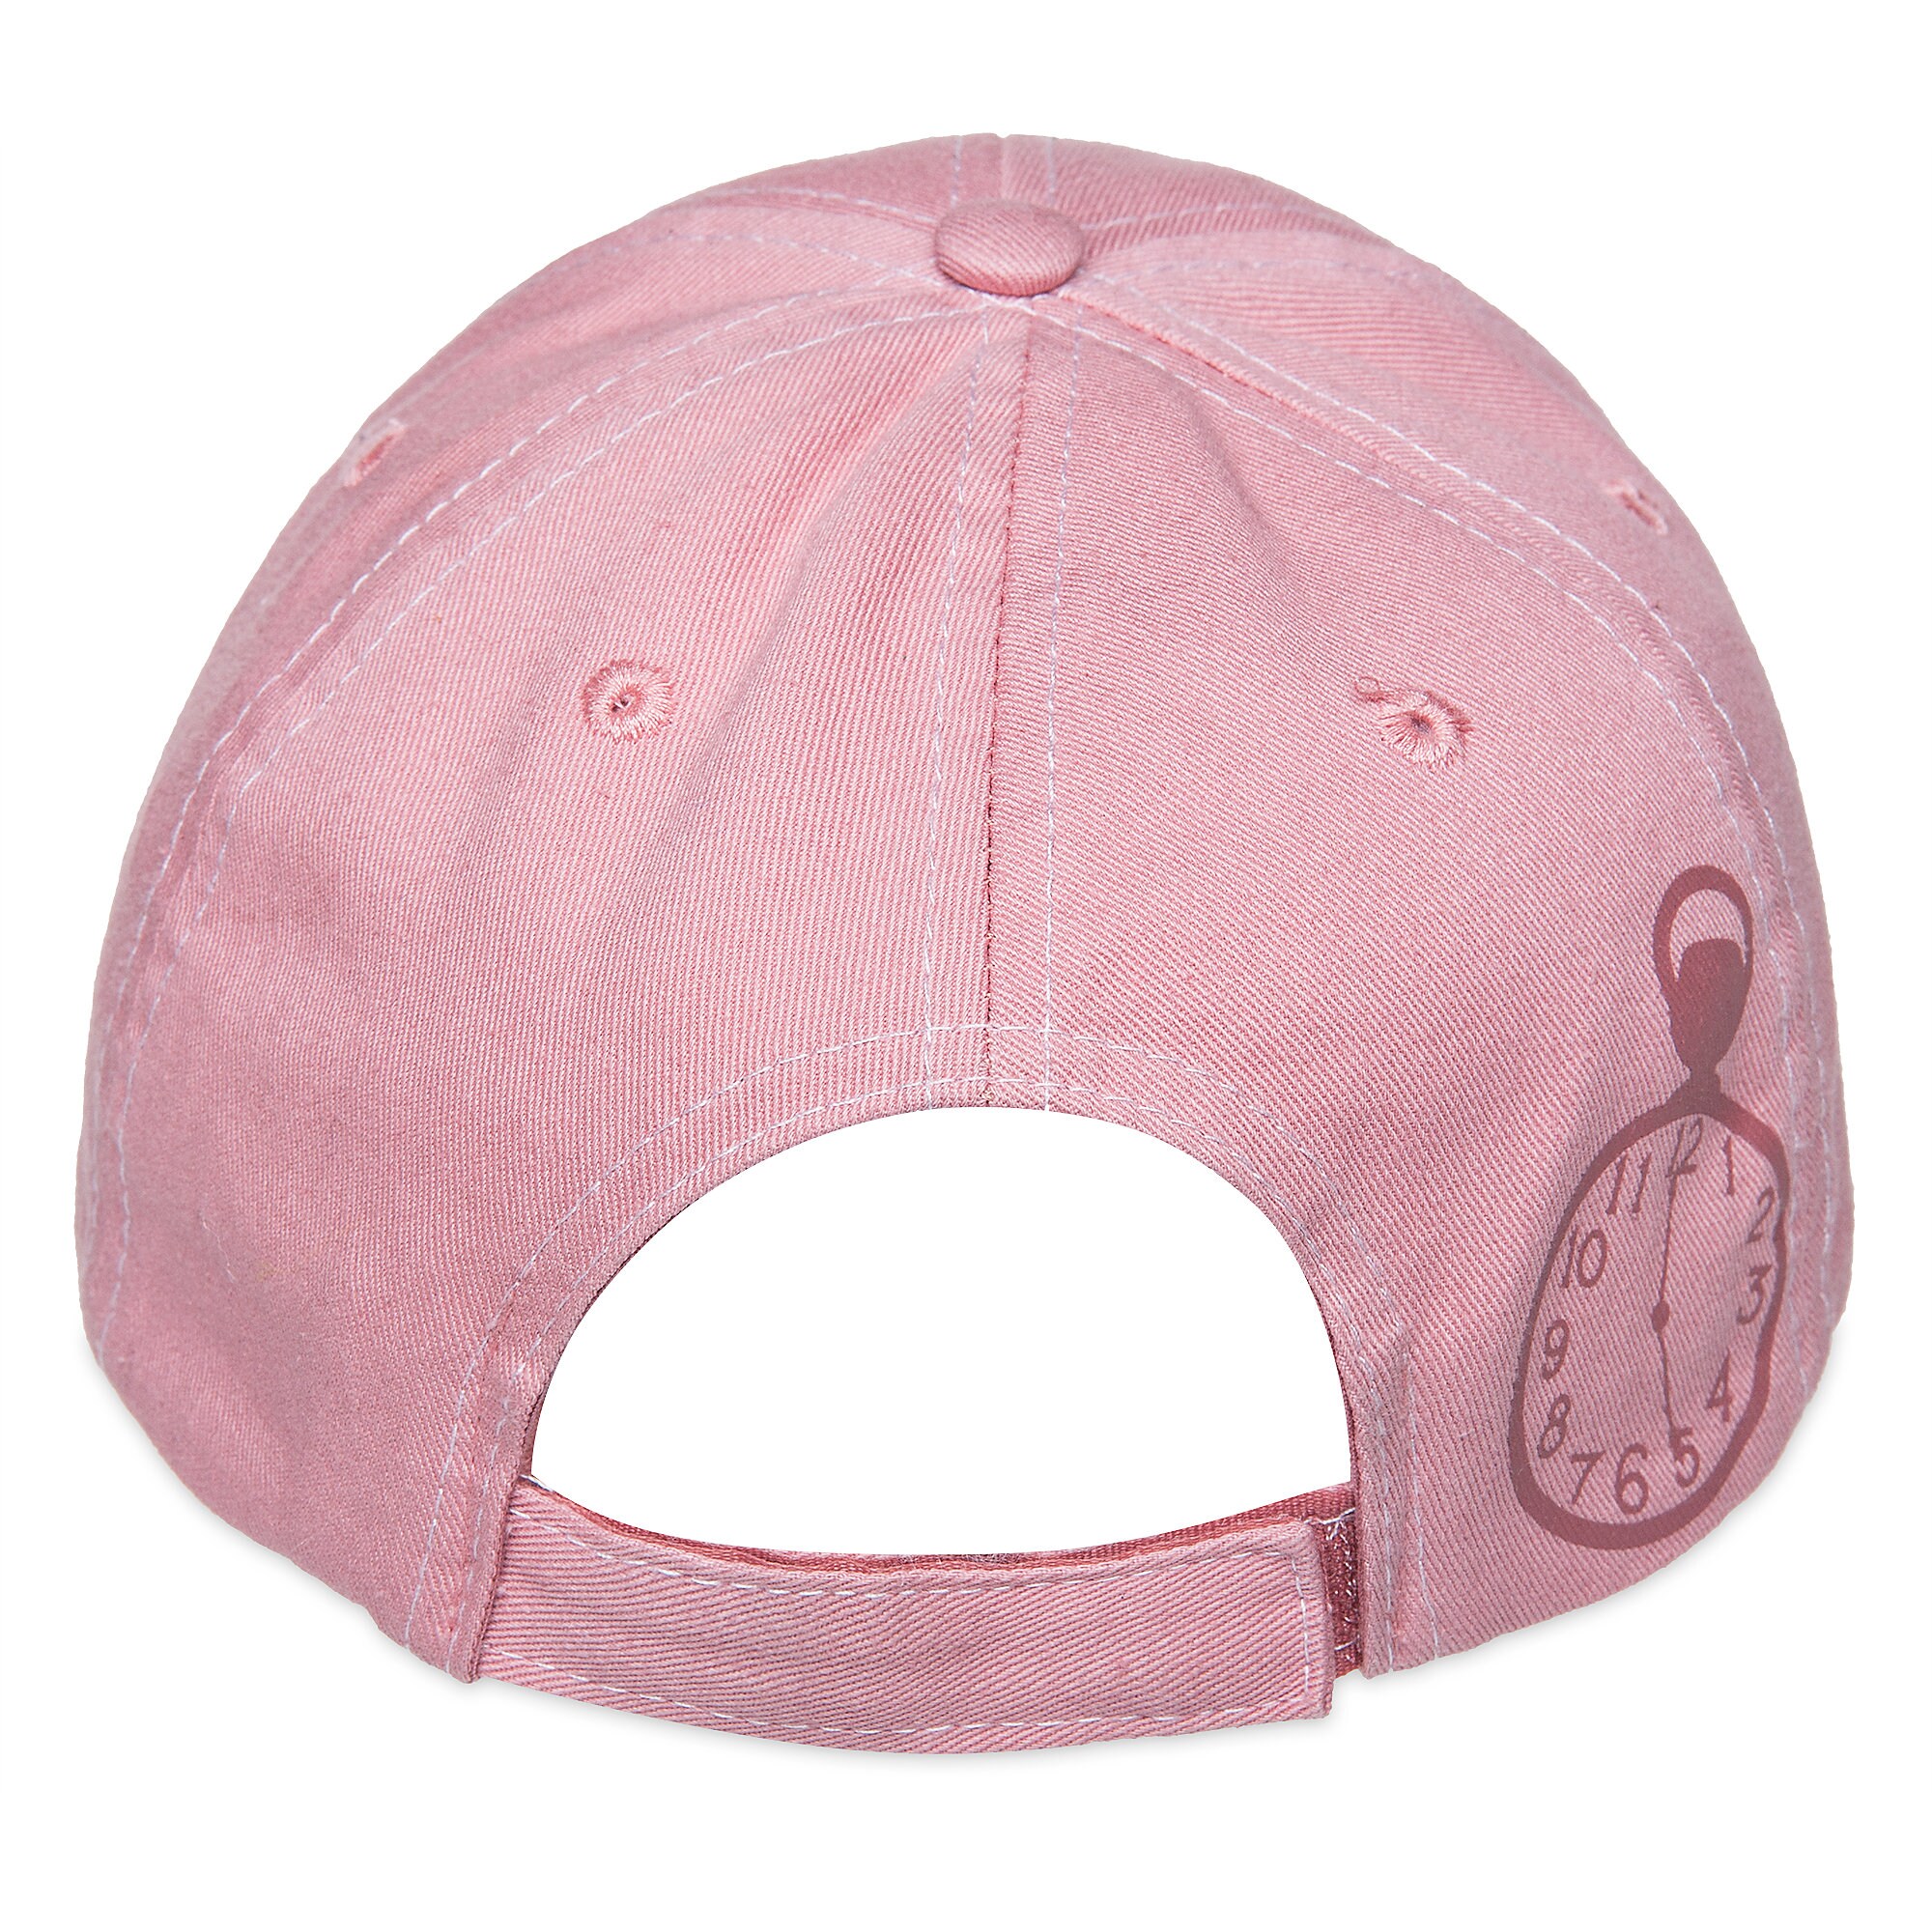 White Rabbit ''Late For Everything'' Baseball Cap for Adults - Alice in Wonderland